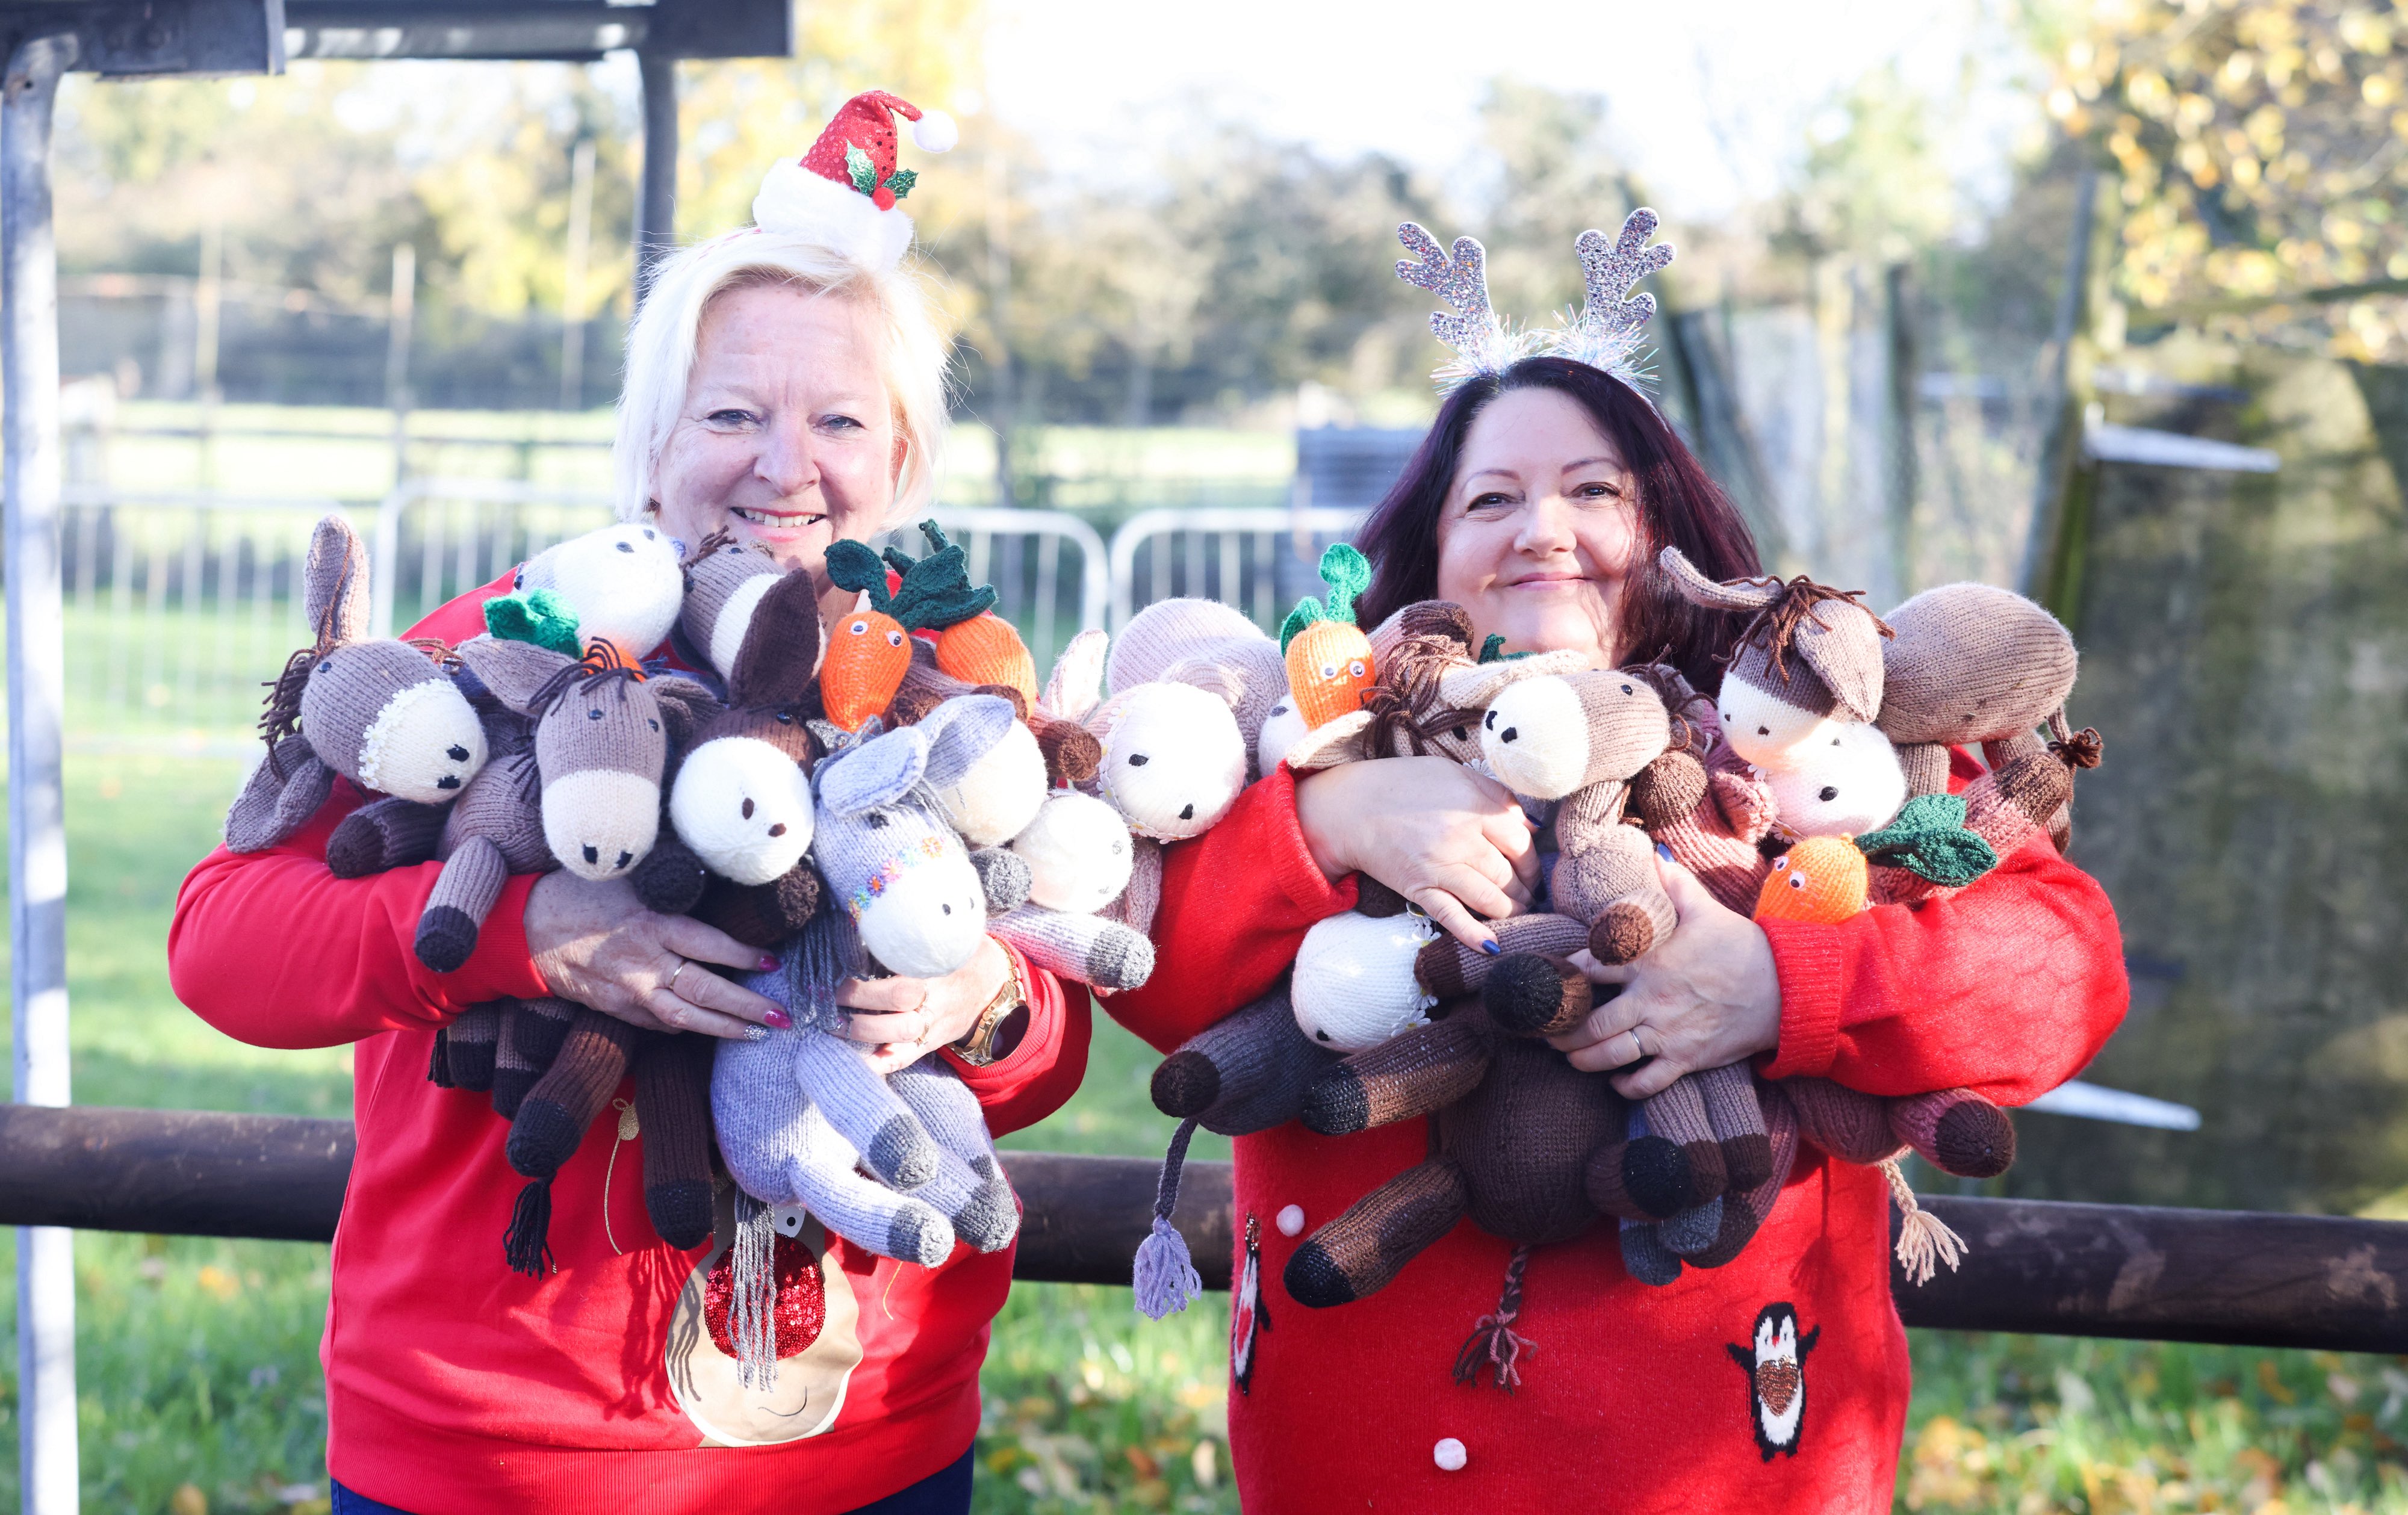 Lottery winners Debra Pearce (right) and Susan Crossland with some of the knitted toys. (National Lottery/ PA)